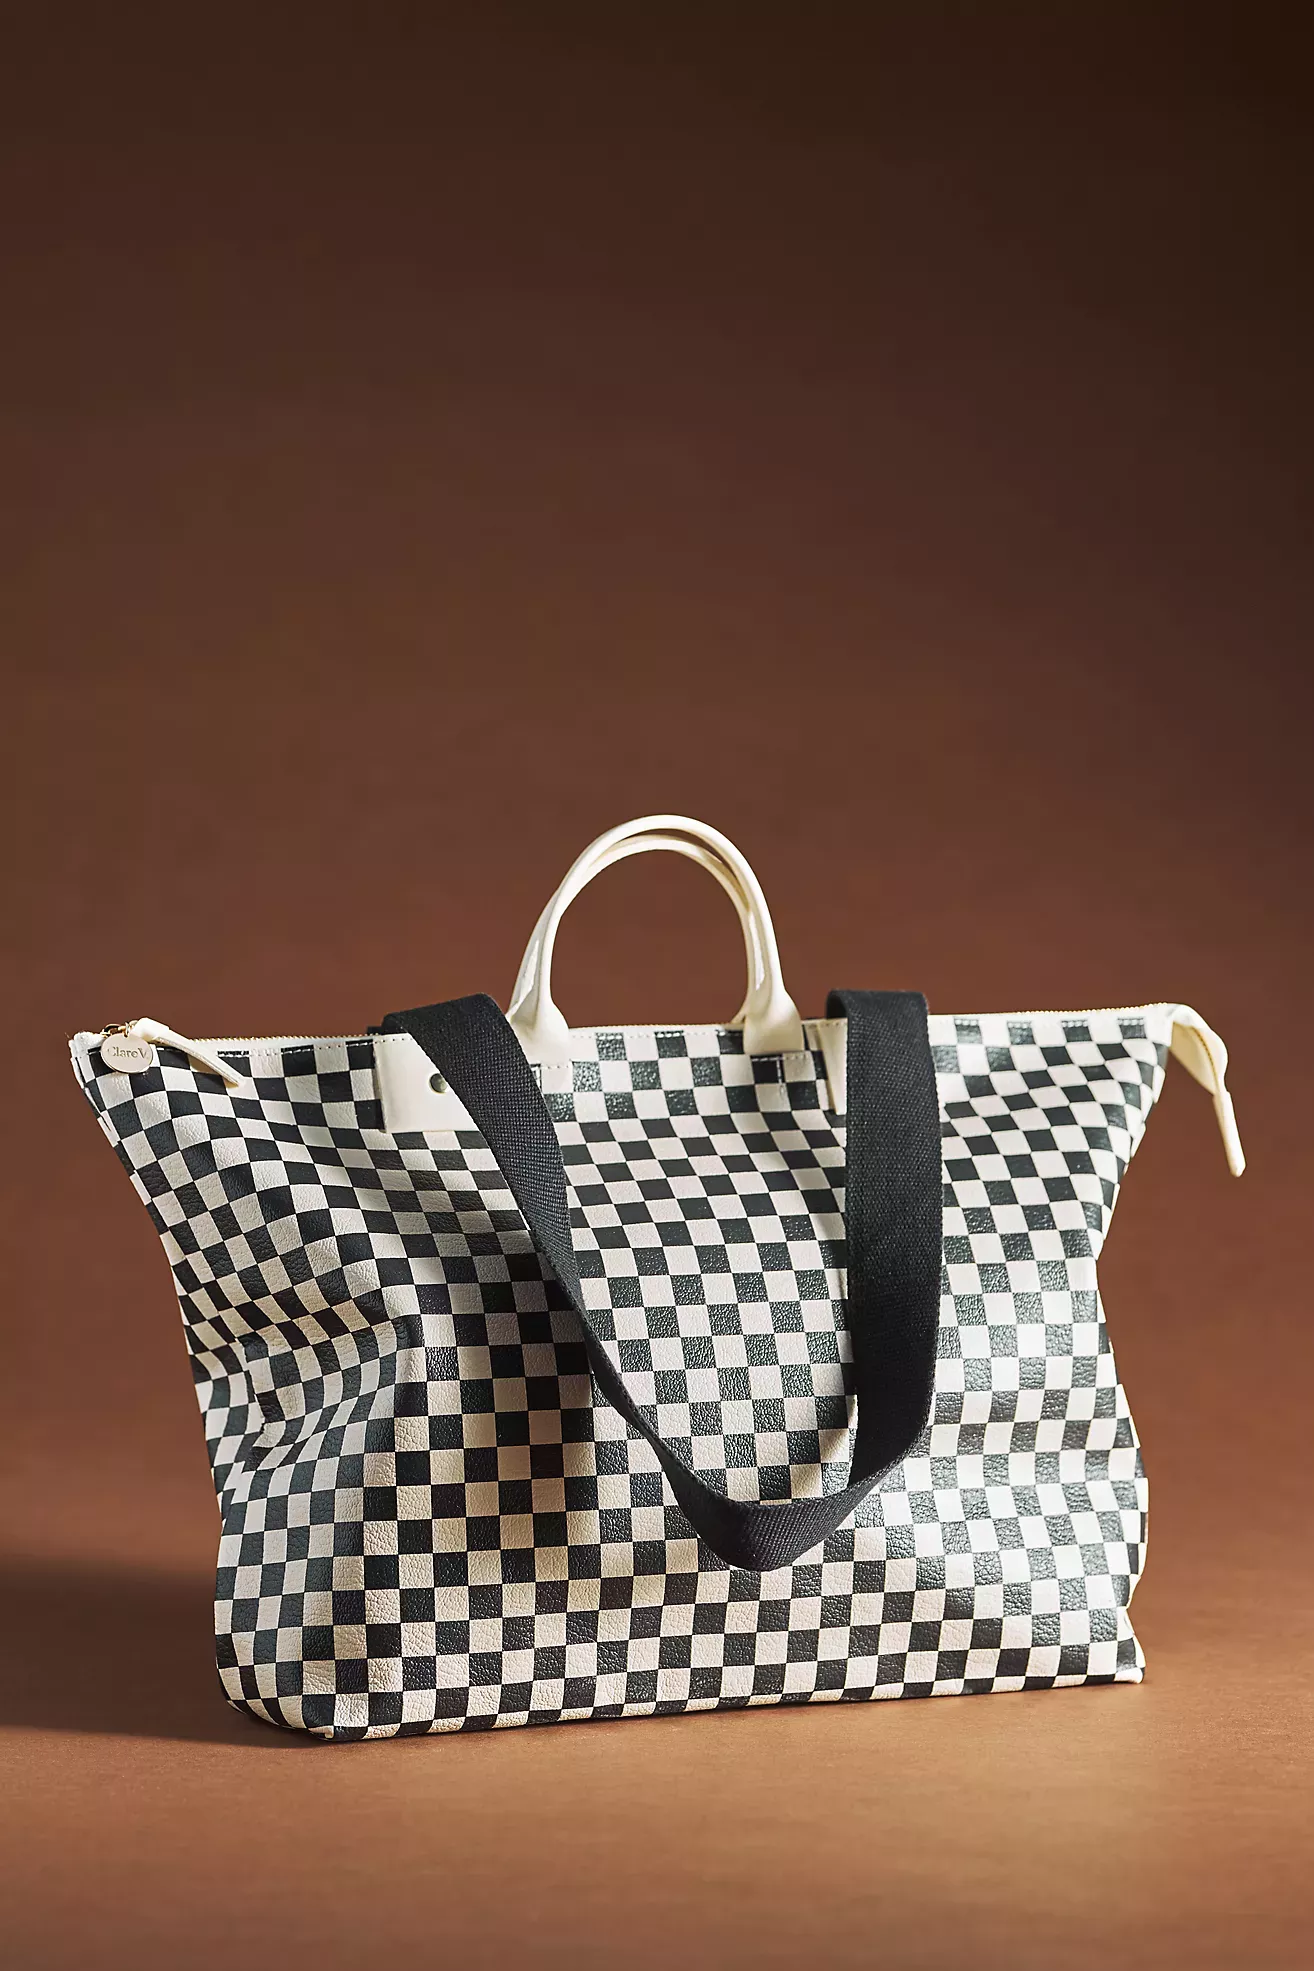 Clare V, Bags, New Clare V Lil Zip Sac Checkered Pouch